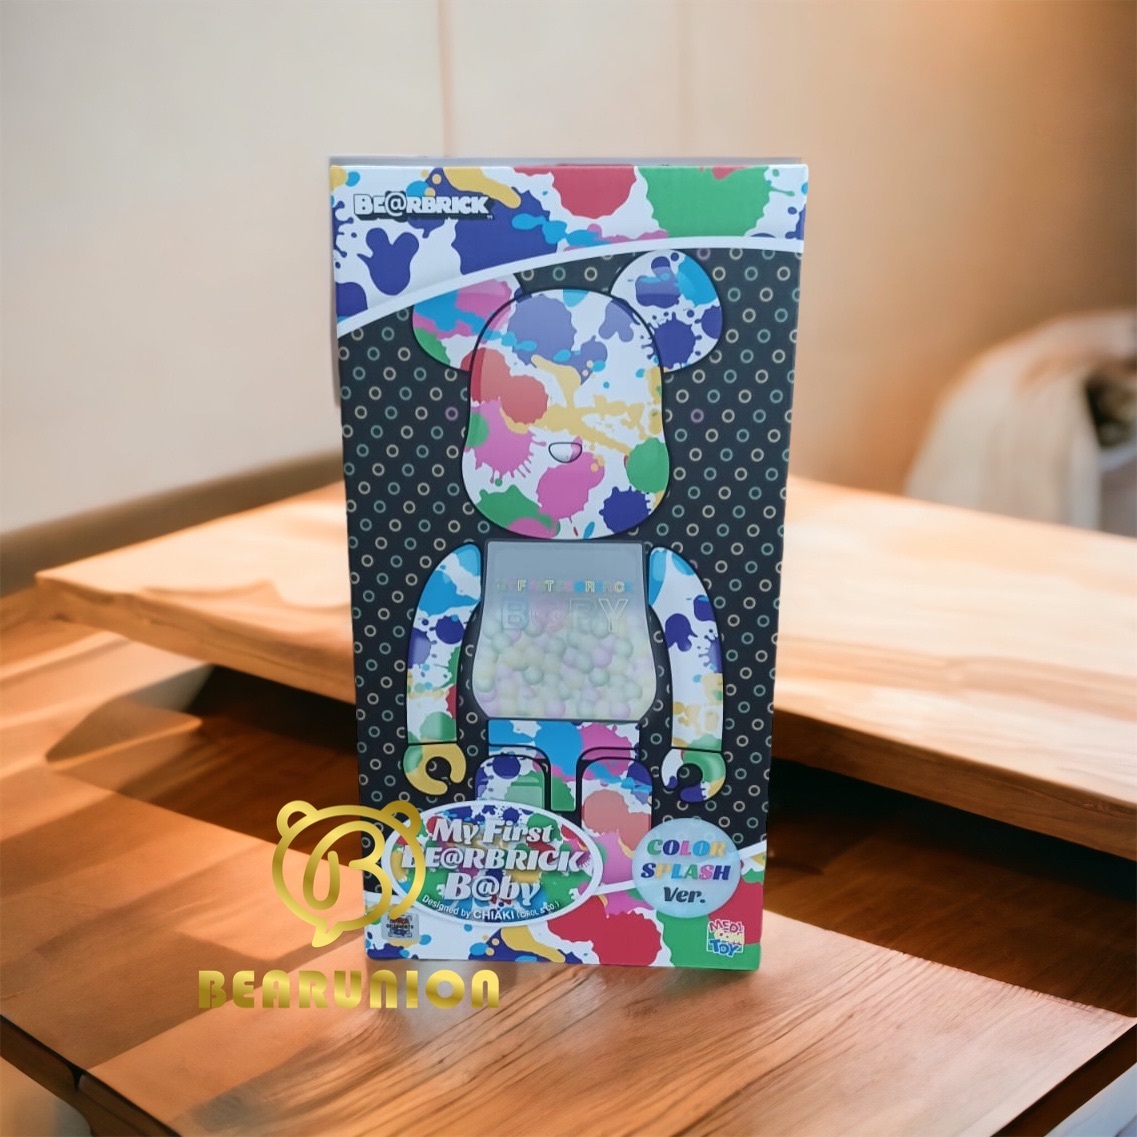 MY FIRST BE@RBRICK B@BY COLOR SPLASH 400-